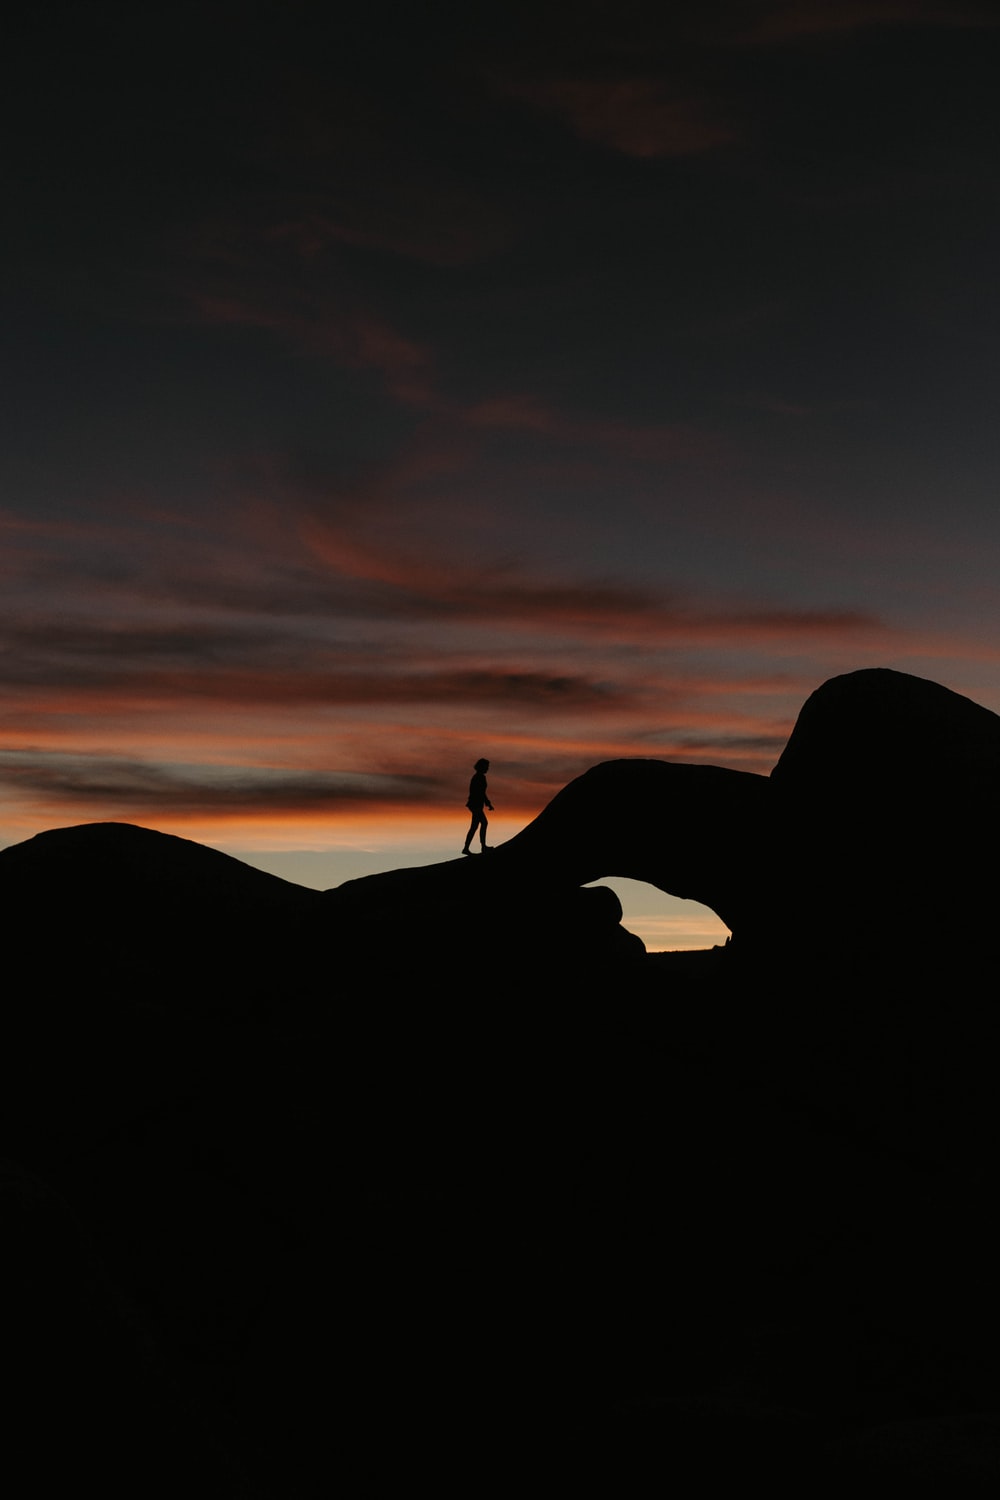 Joshua Tree Sunset Pictures Download Free Images on